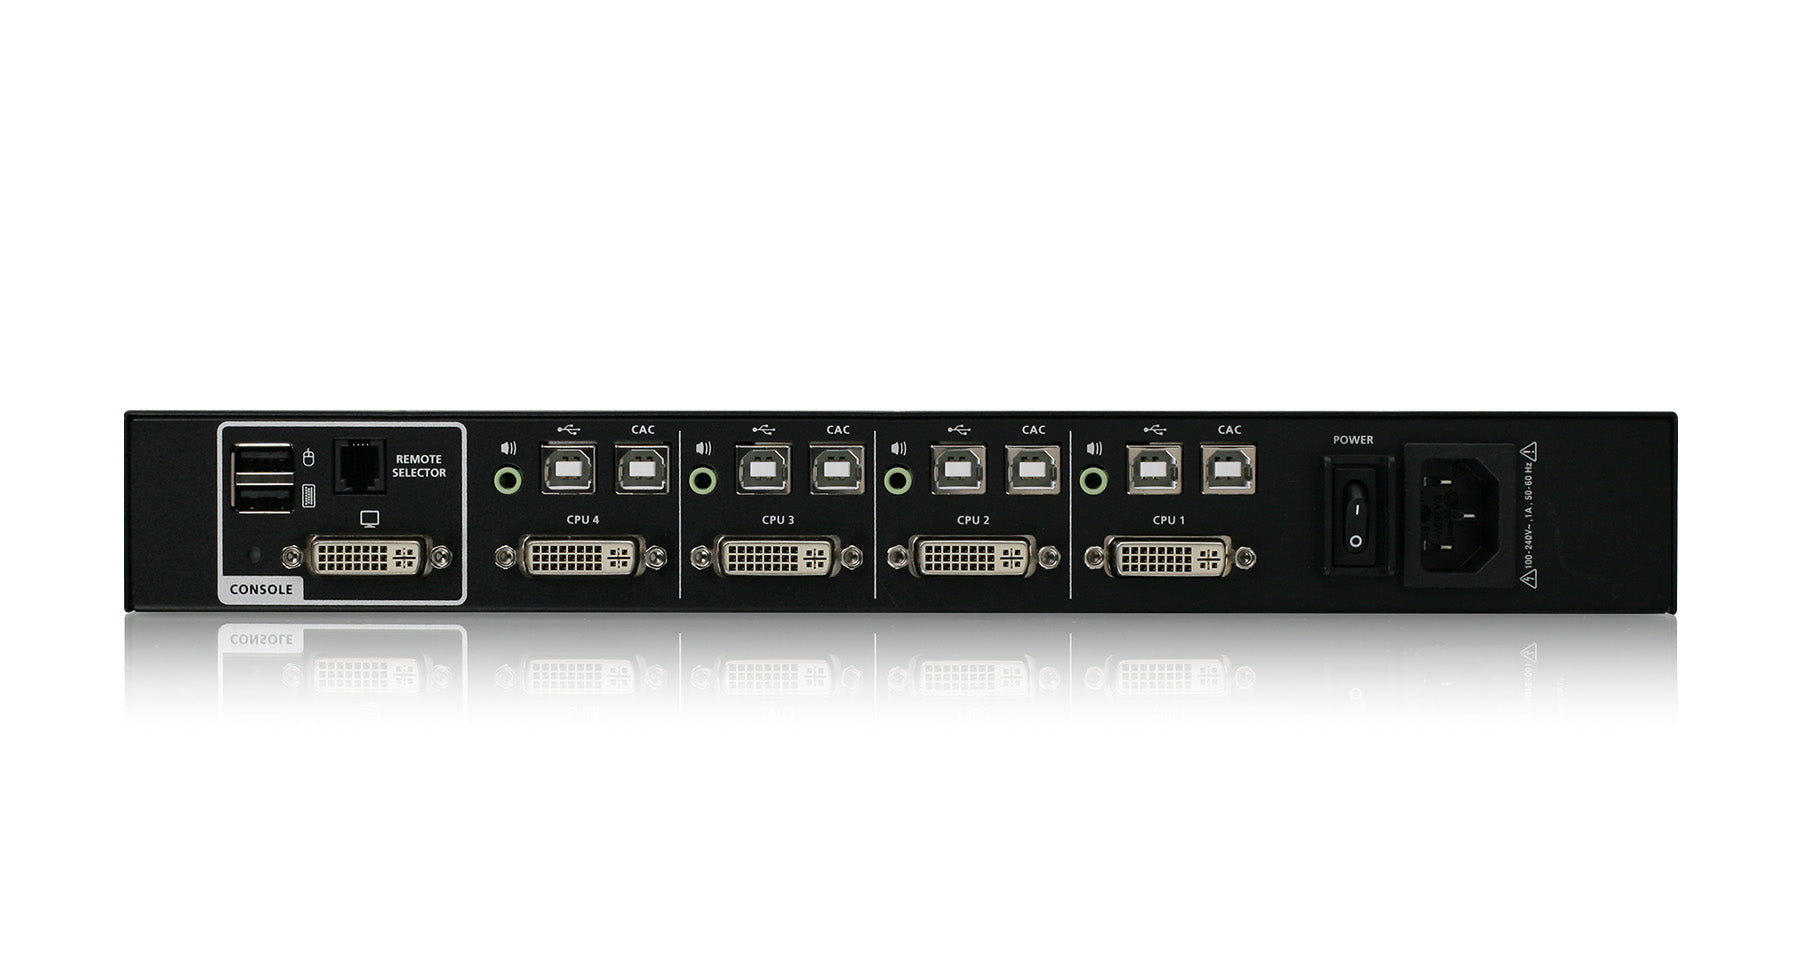 4-Port Single View DVI Secure KVM Switch w/Audio and CAC Support